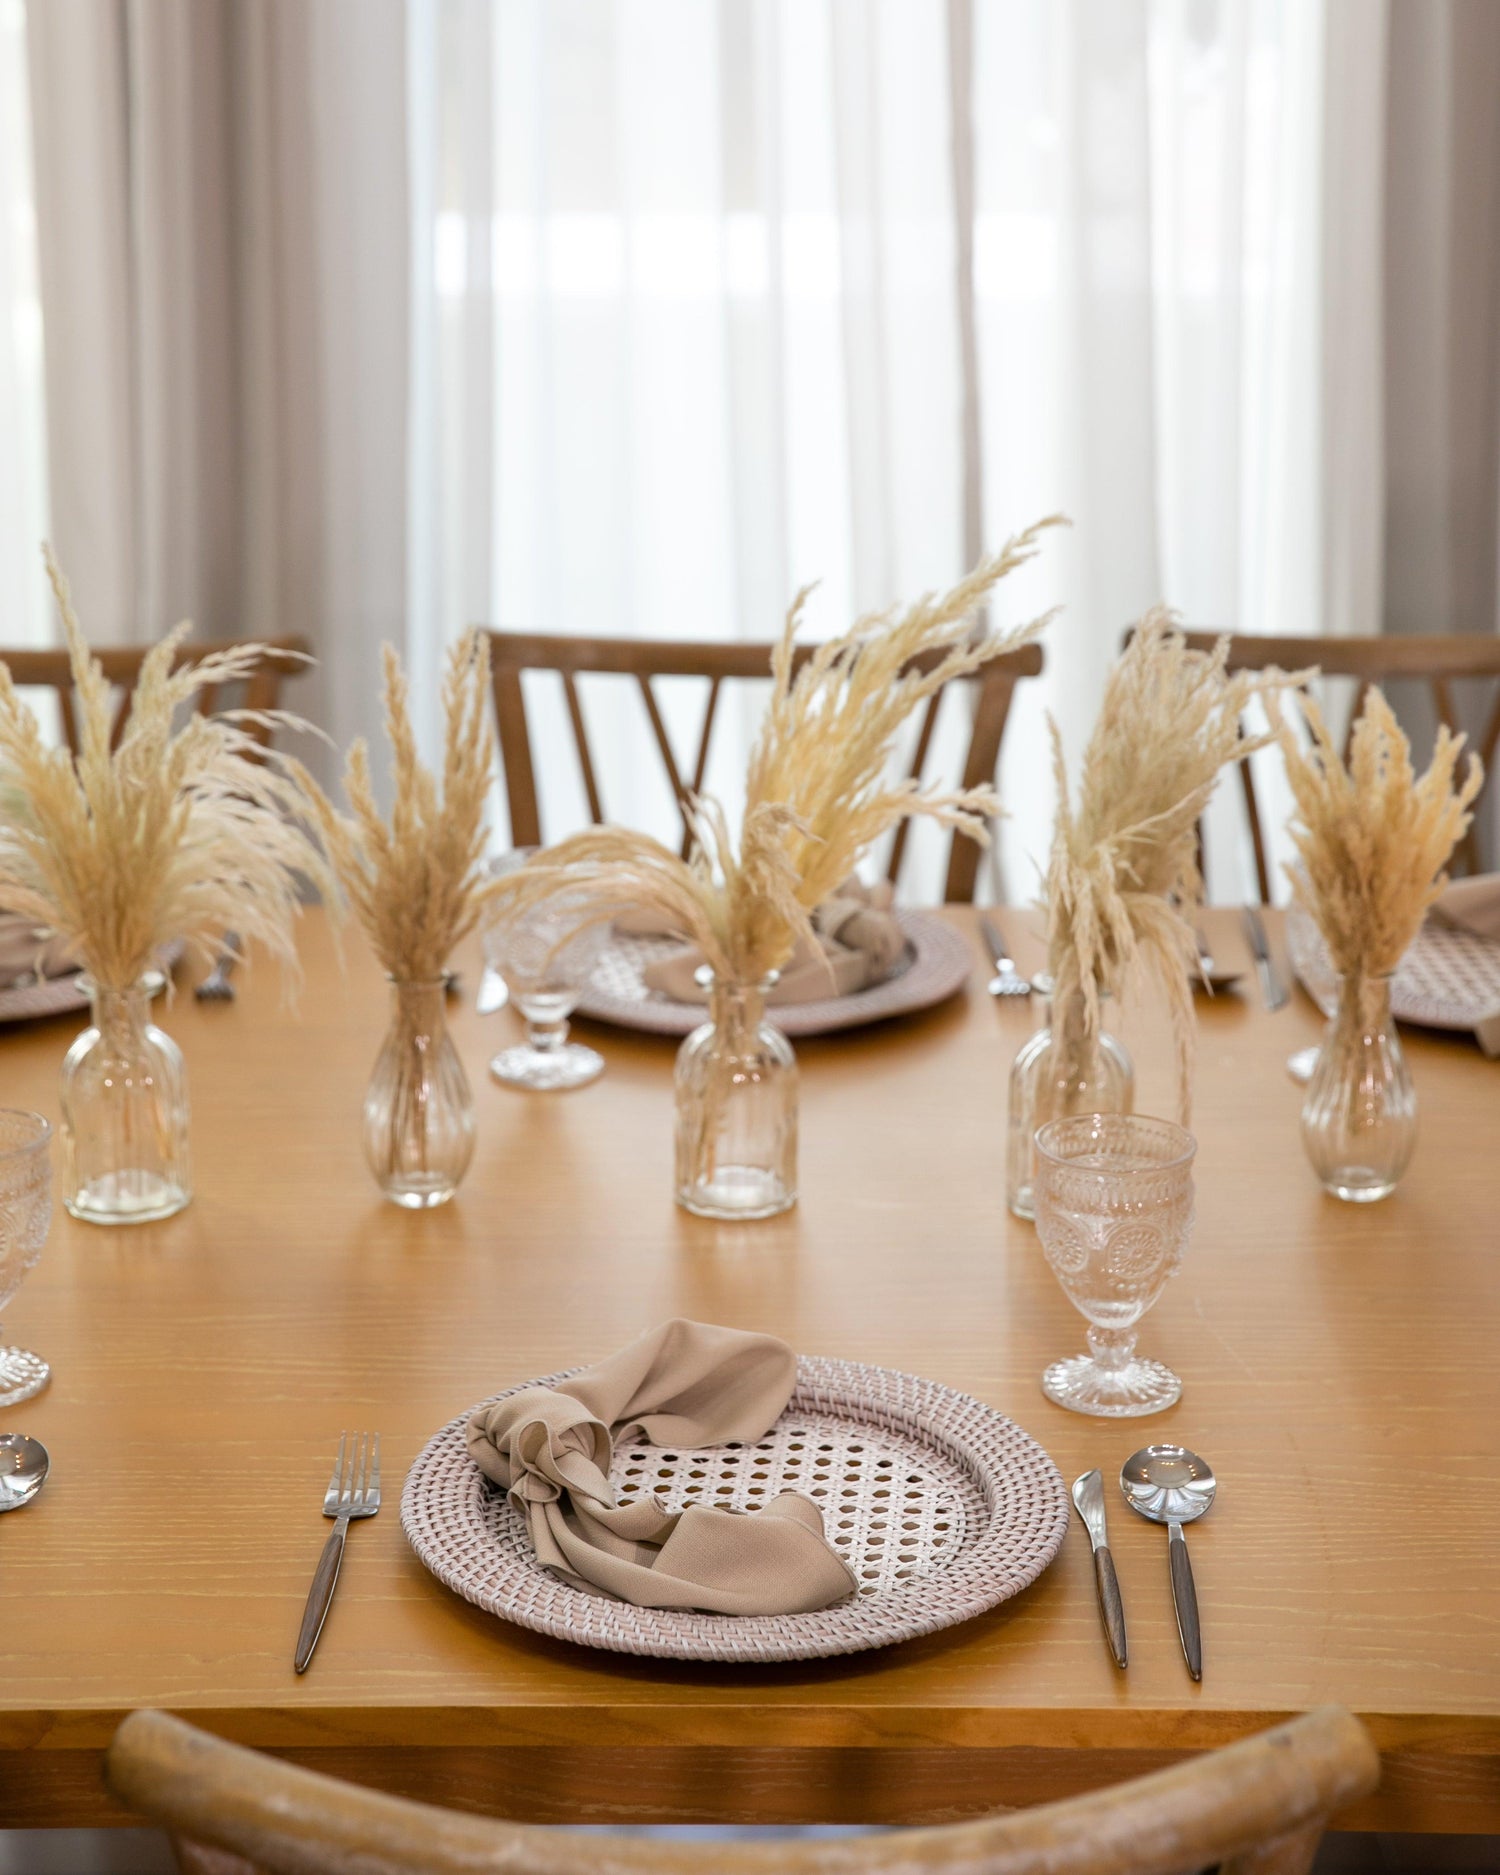 Boho &amp; Woods party package: Table with tableware, centrepieces, and glasses/vases of wheat.